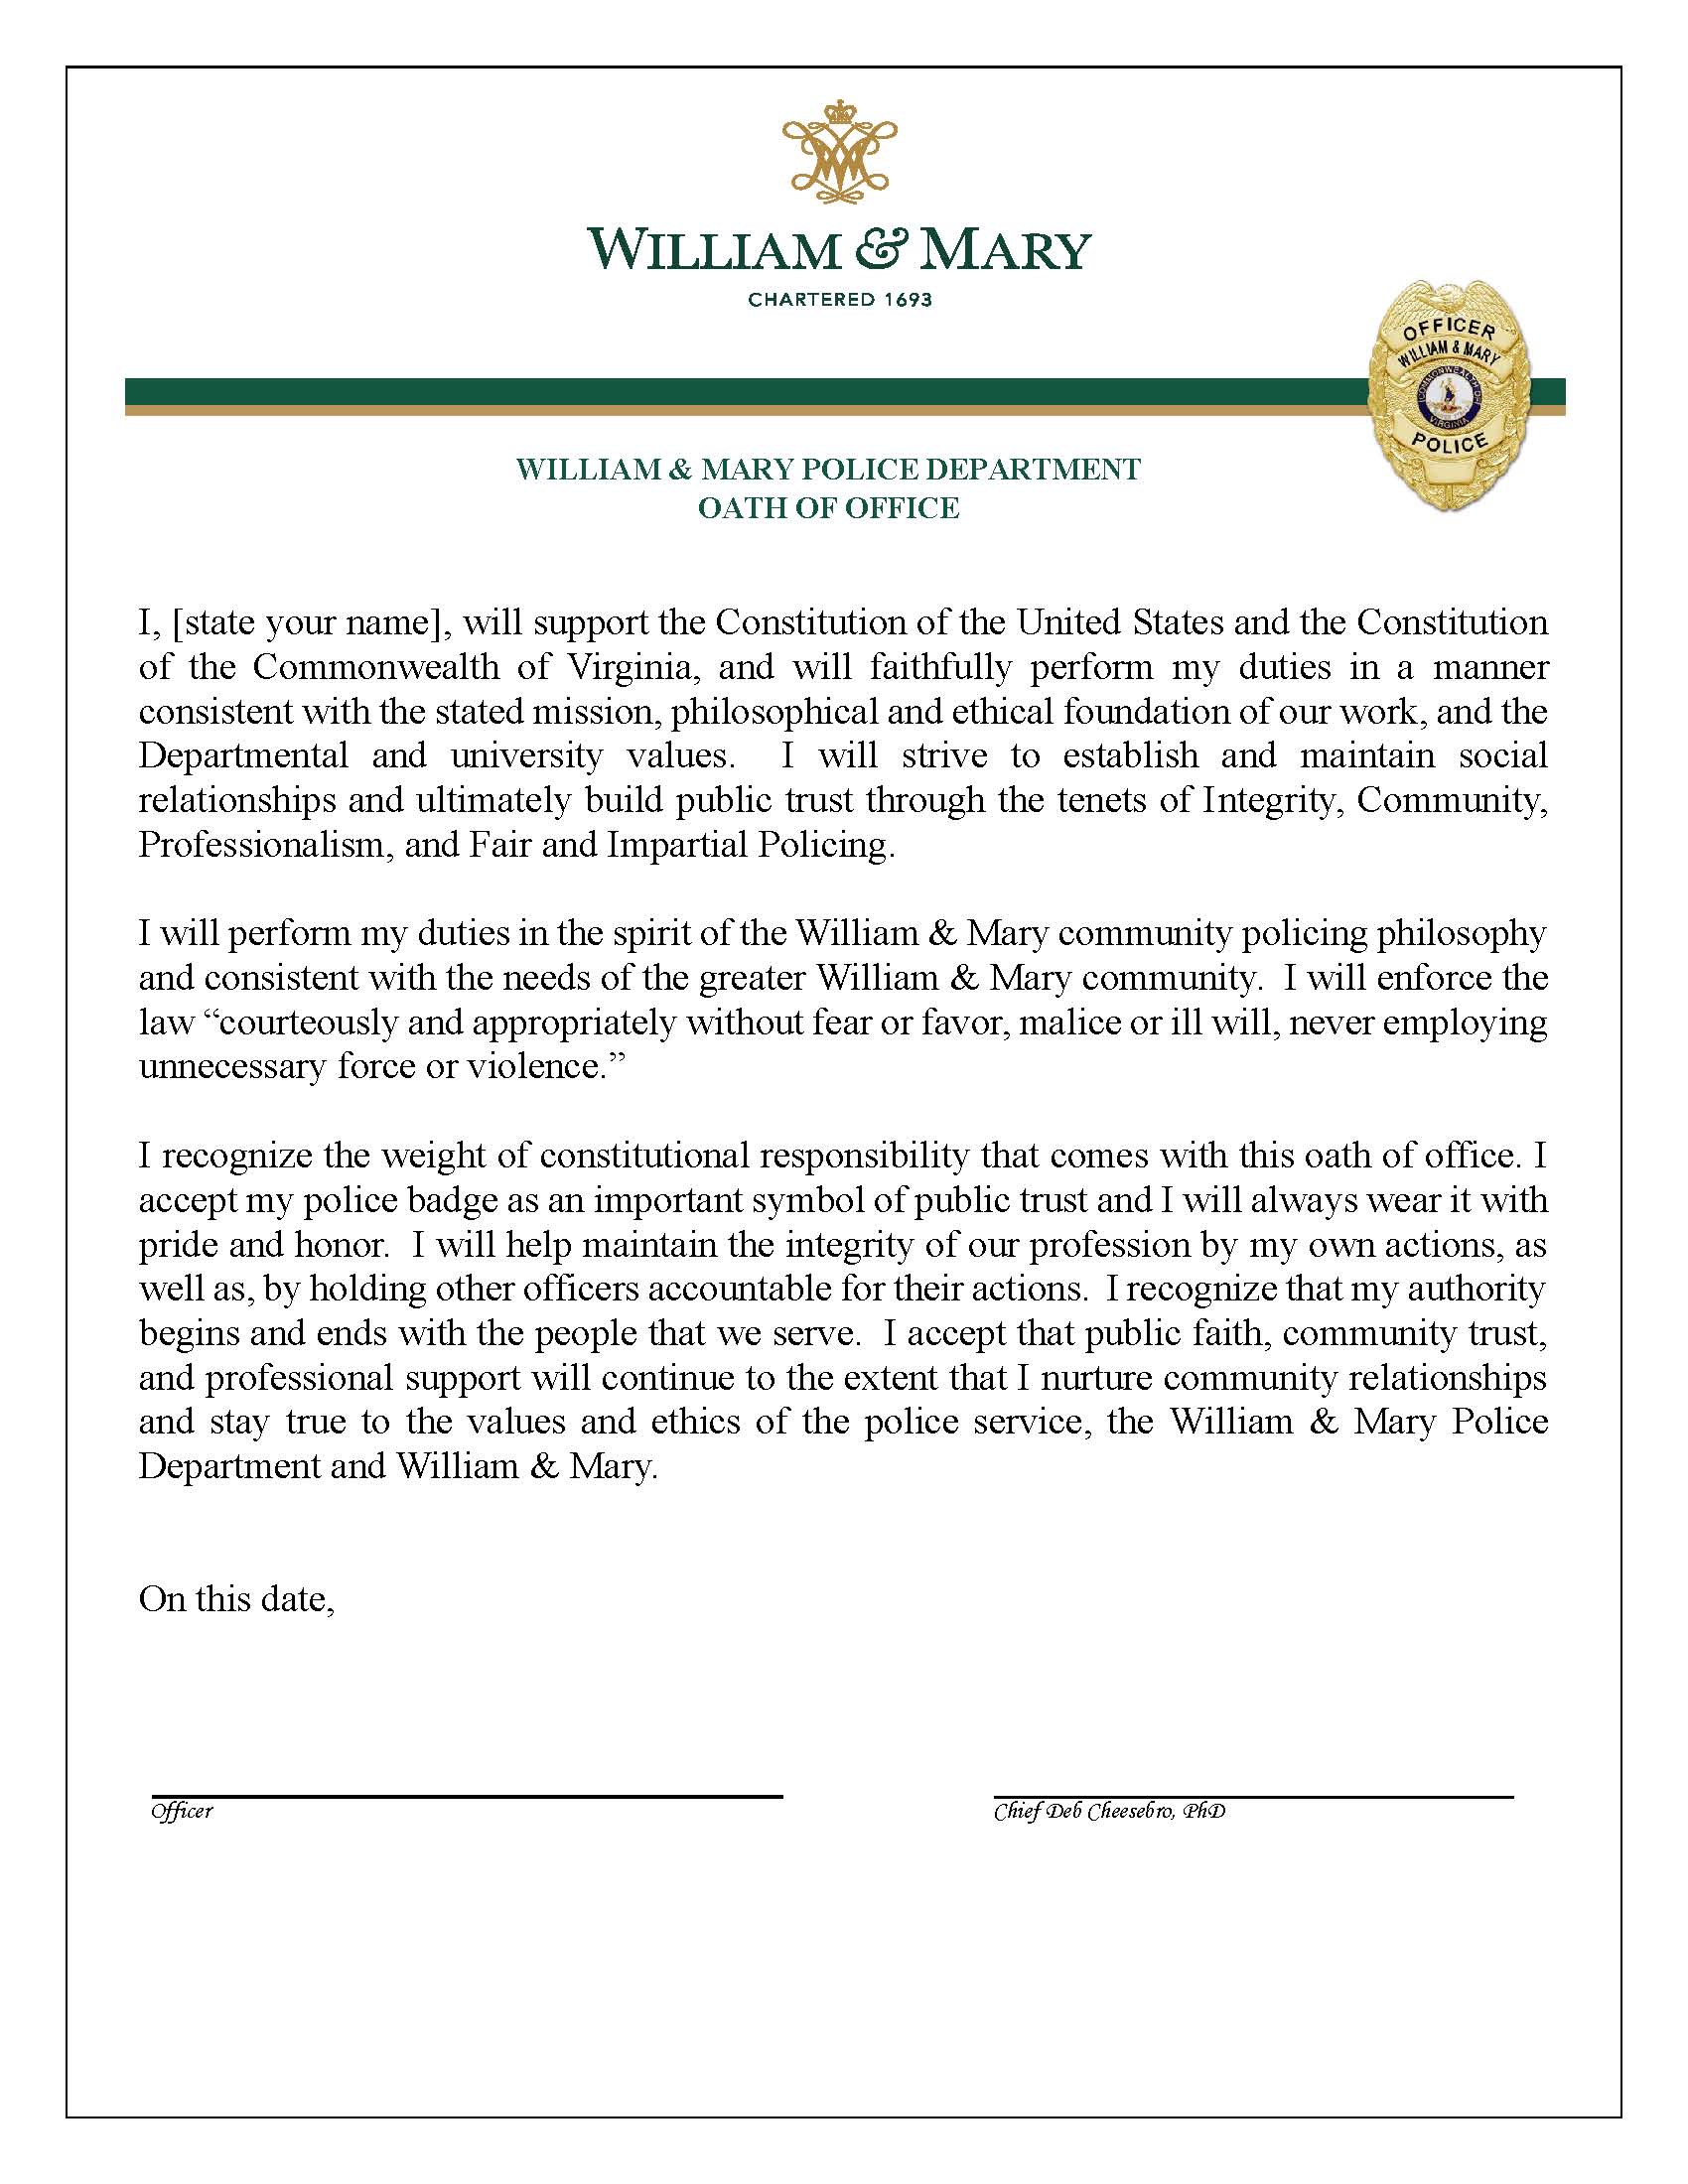 Mission Statement Oath of Office William Mary